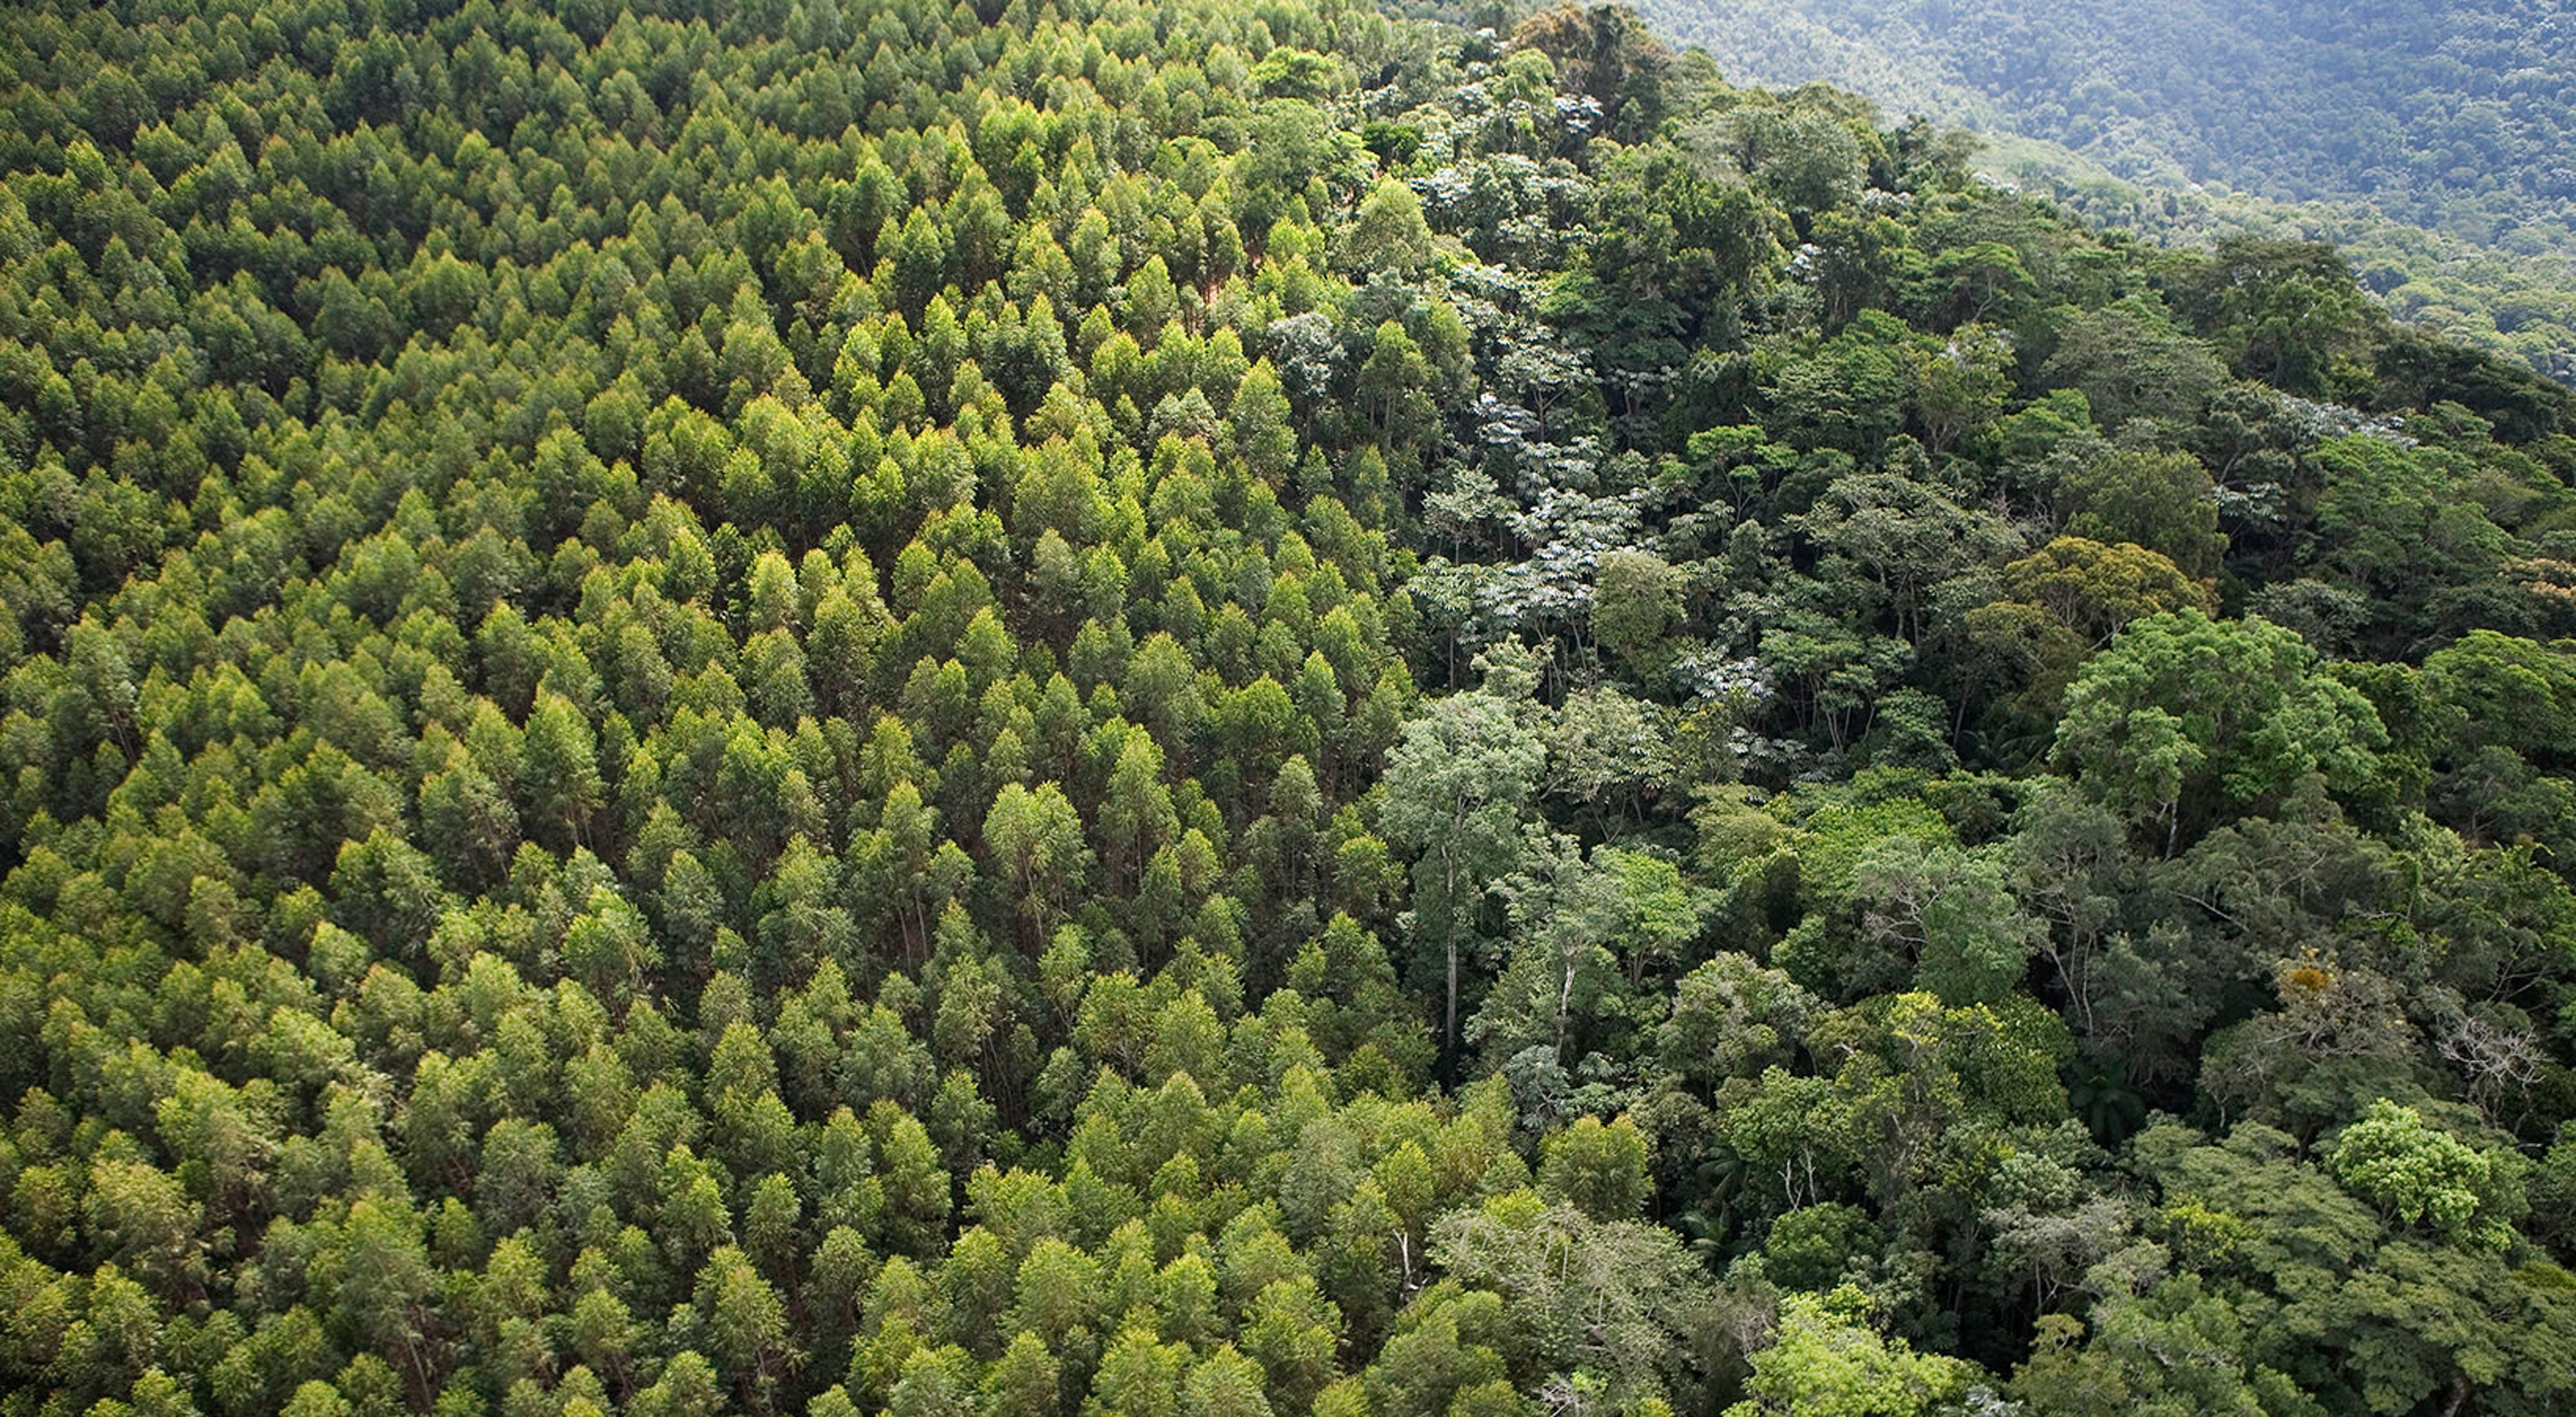 Aerial view of contrasting forest of planted eucalyptus (on left) and natural forest; near the Cachoeira Reservoir.